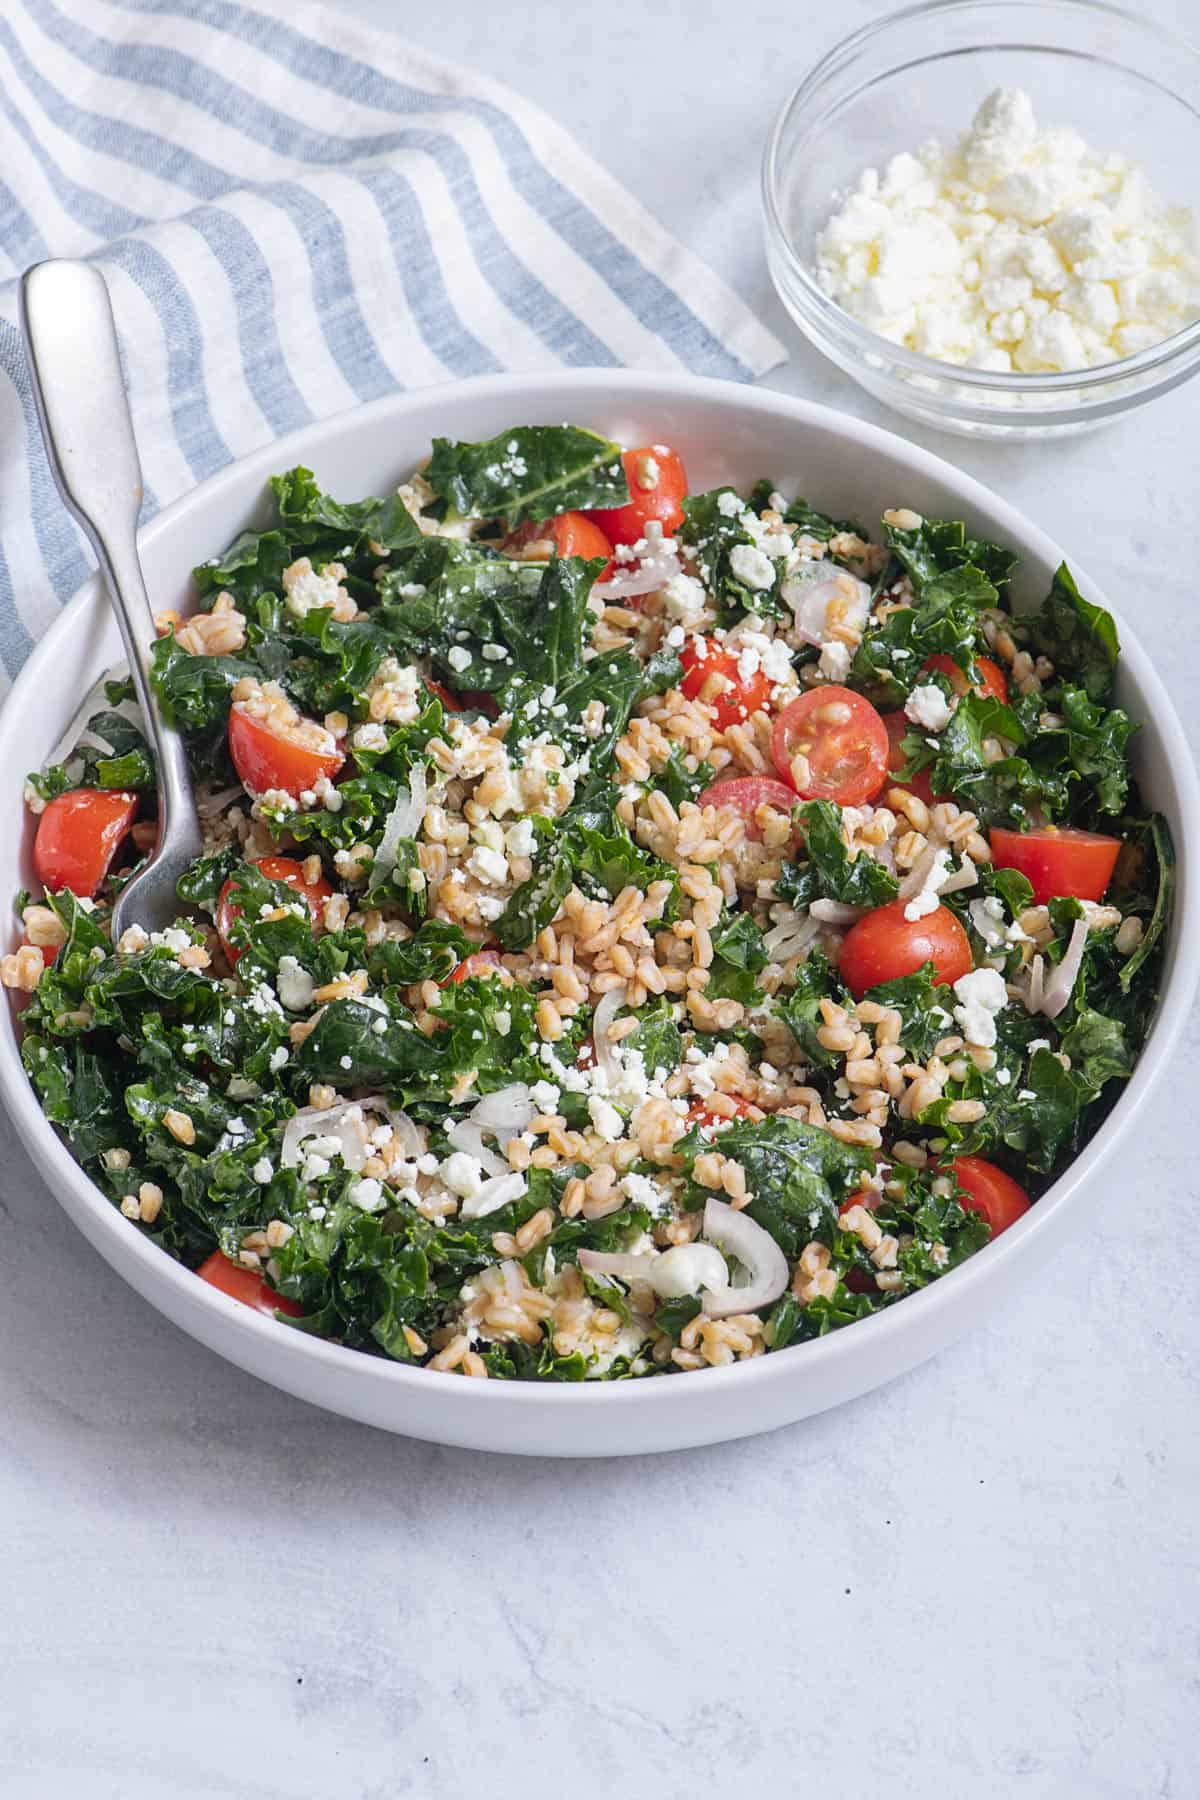 Farro salad served in a large white bowl with a small bowl of goat cheese crumbles.